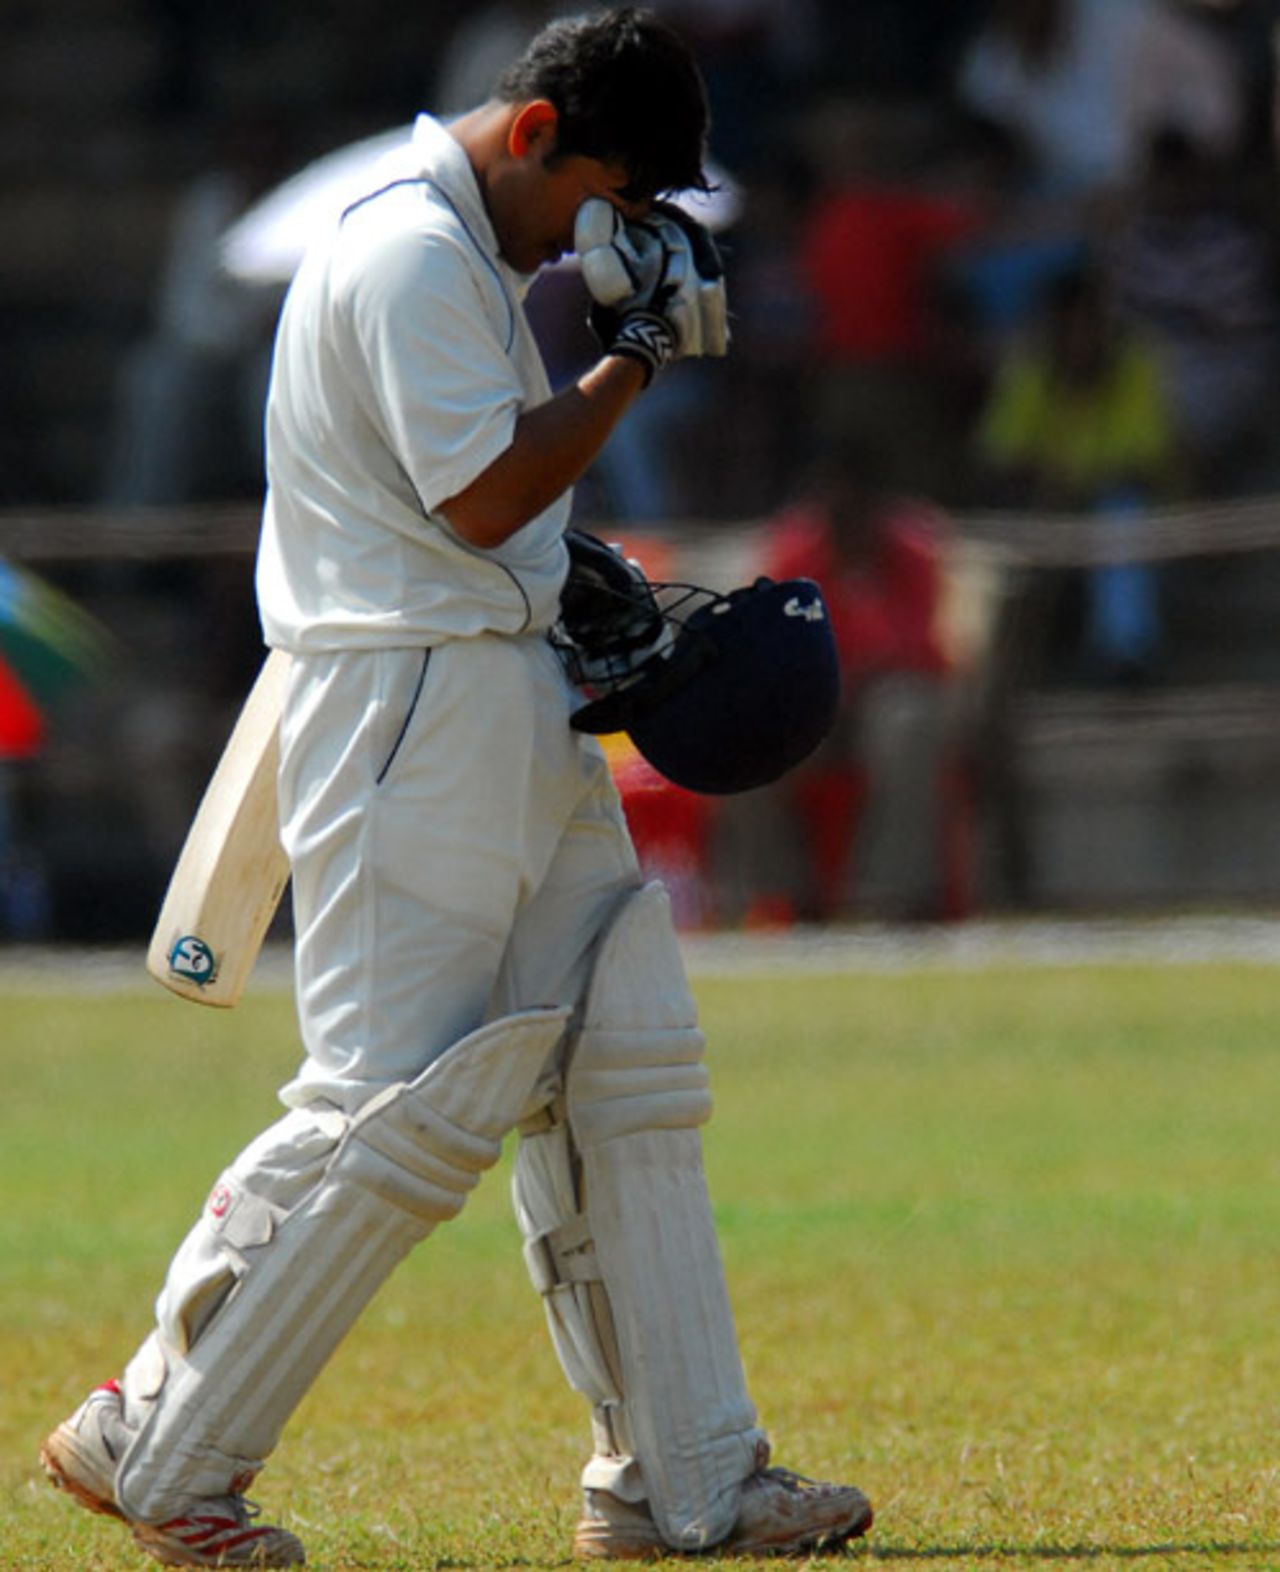 Rajasthan's Robin Bist is distraught at missing out on his century, Karnataka v Rajasthan, Ranji Trophy Super League, Group A, 4th round, 2nd day, Mysore, December 2, 2007